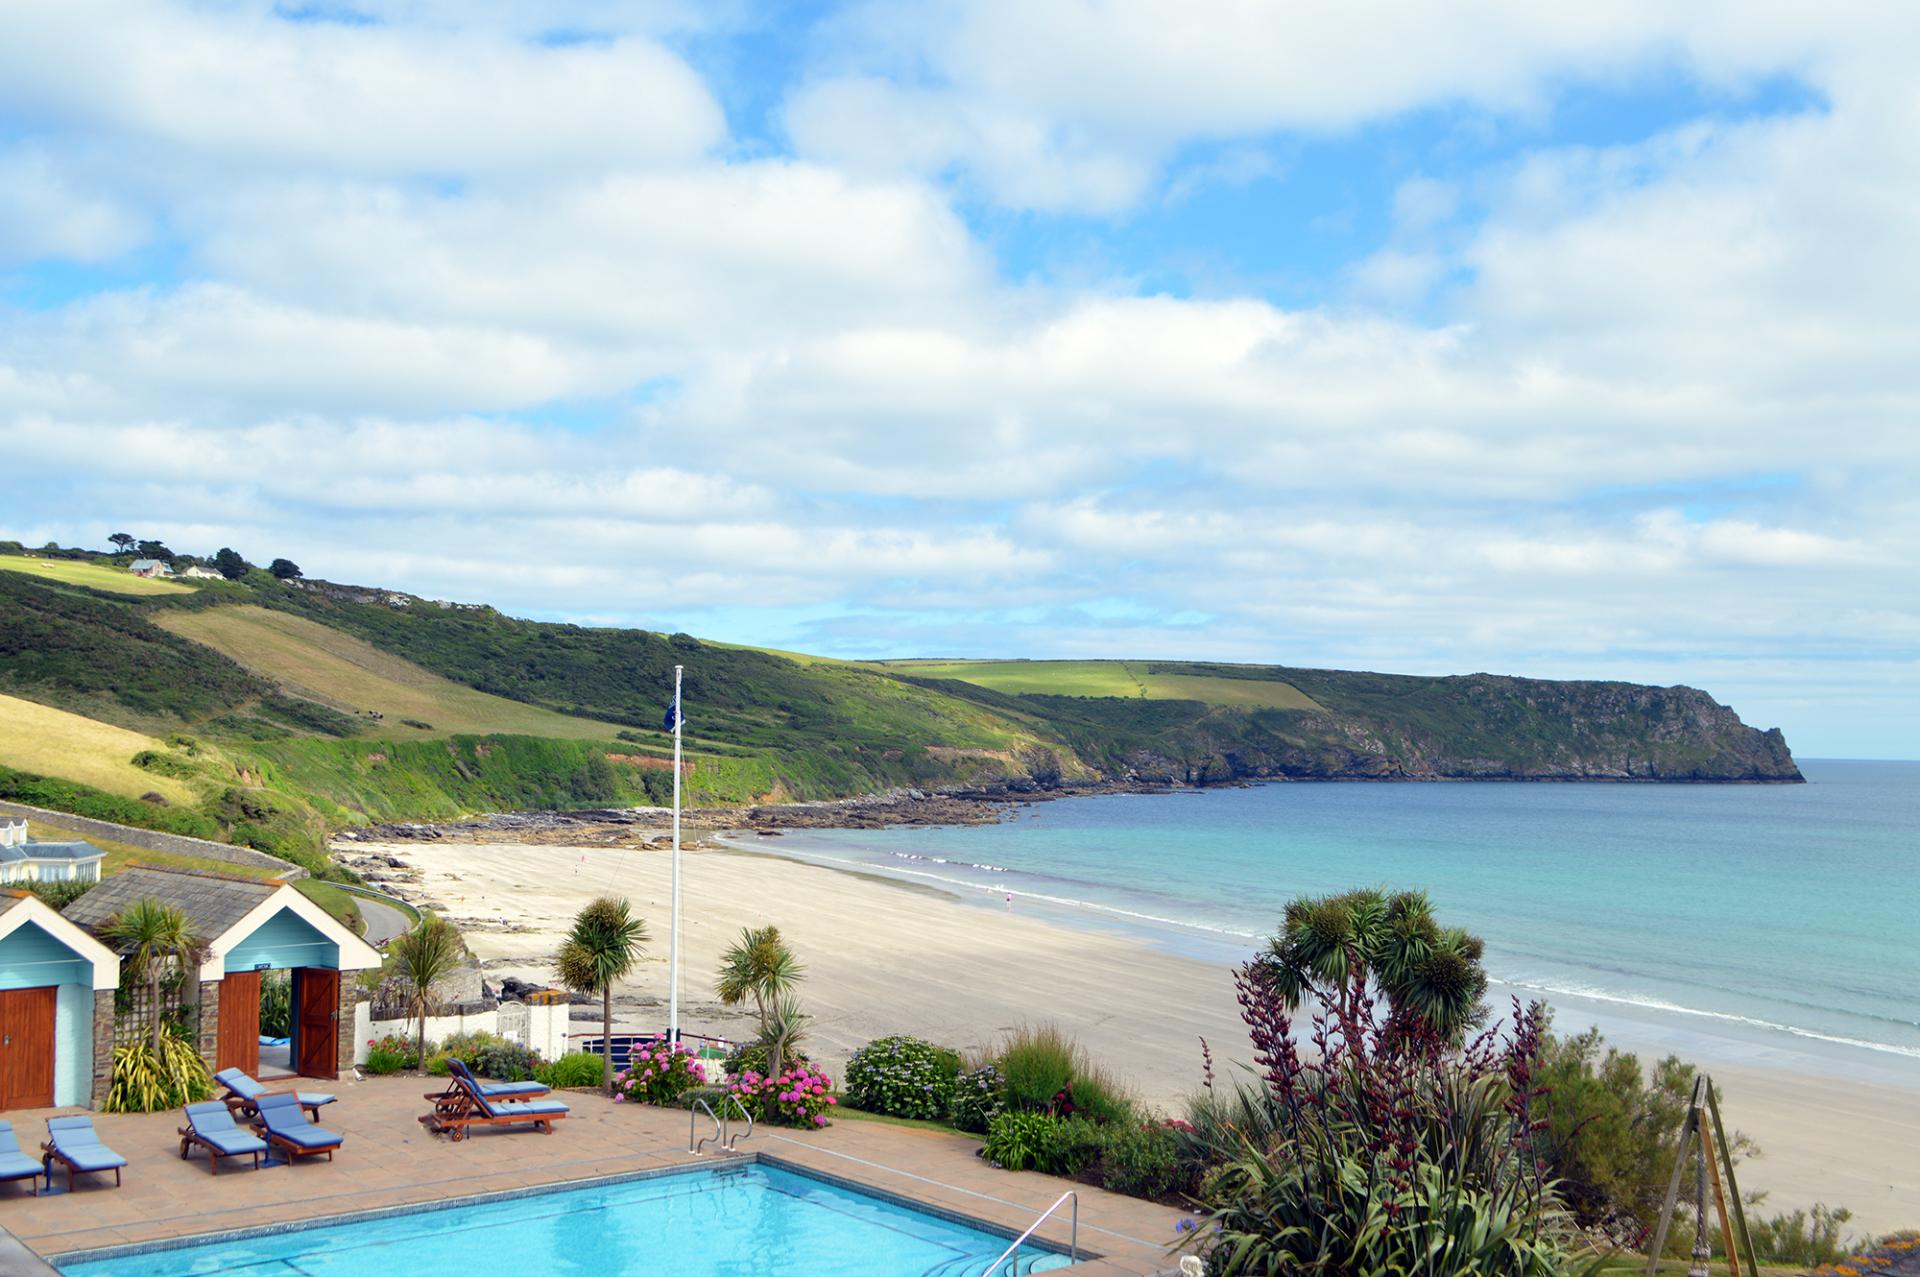 Places to stay: The Nare Hotel, Cornwall